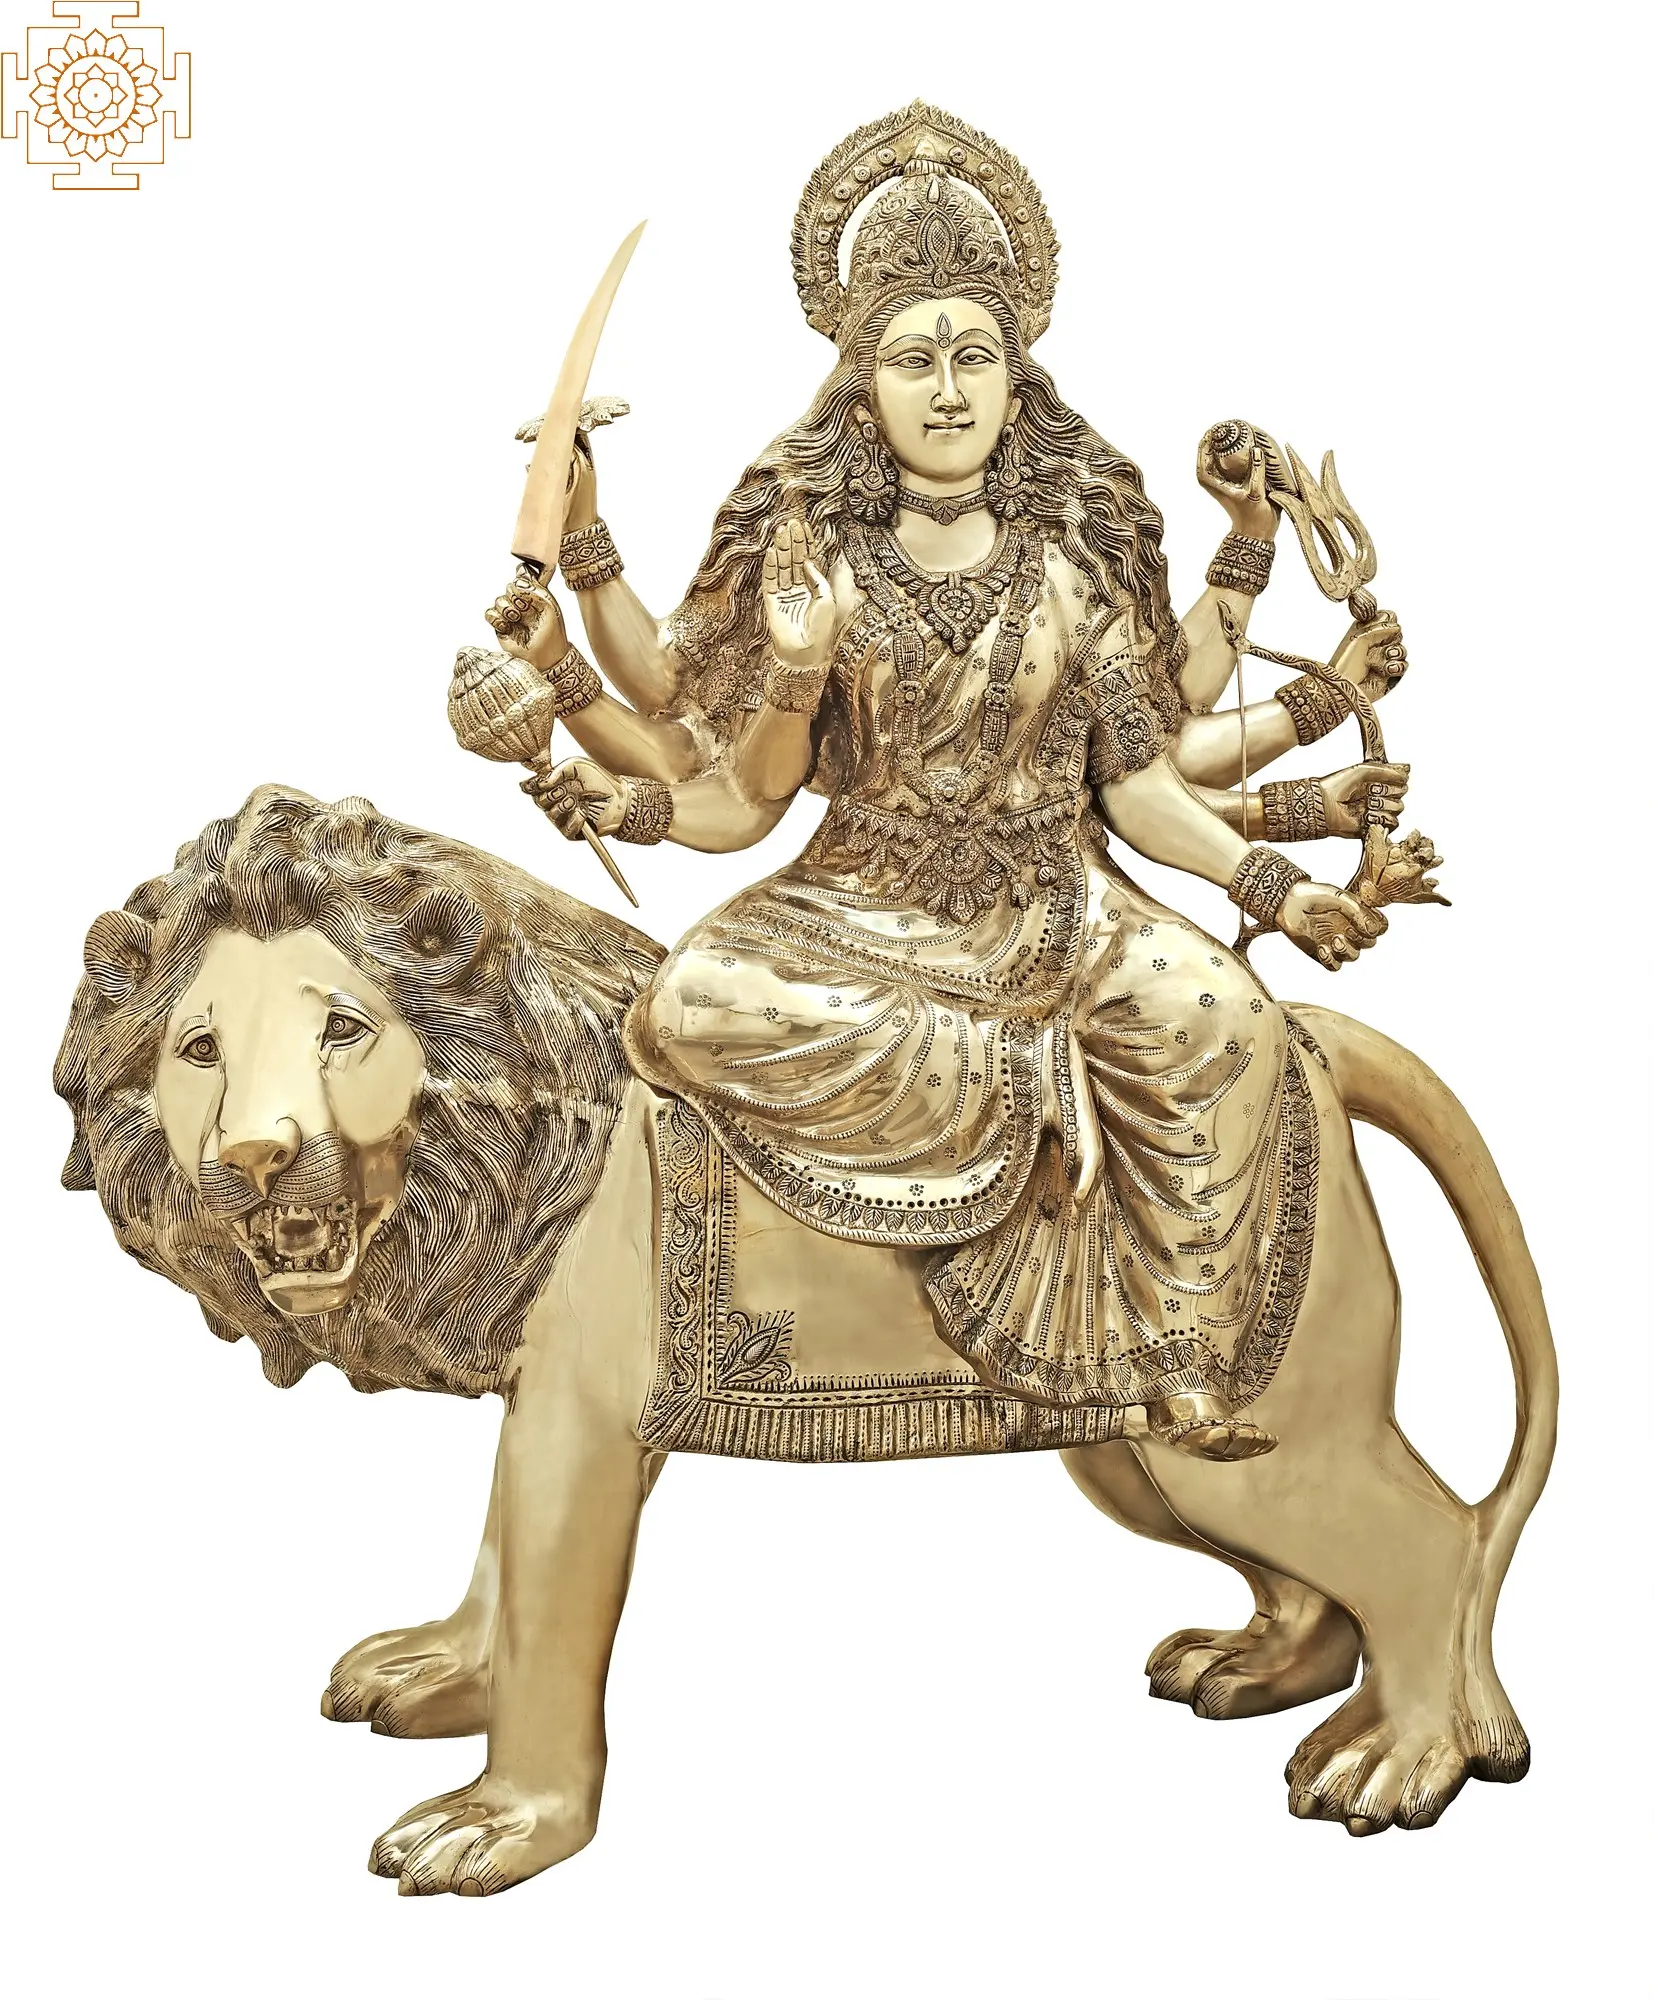 Exotic India Mother Goddess Durga Seated on Lion Brass Statue